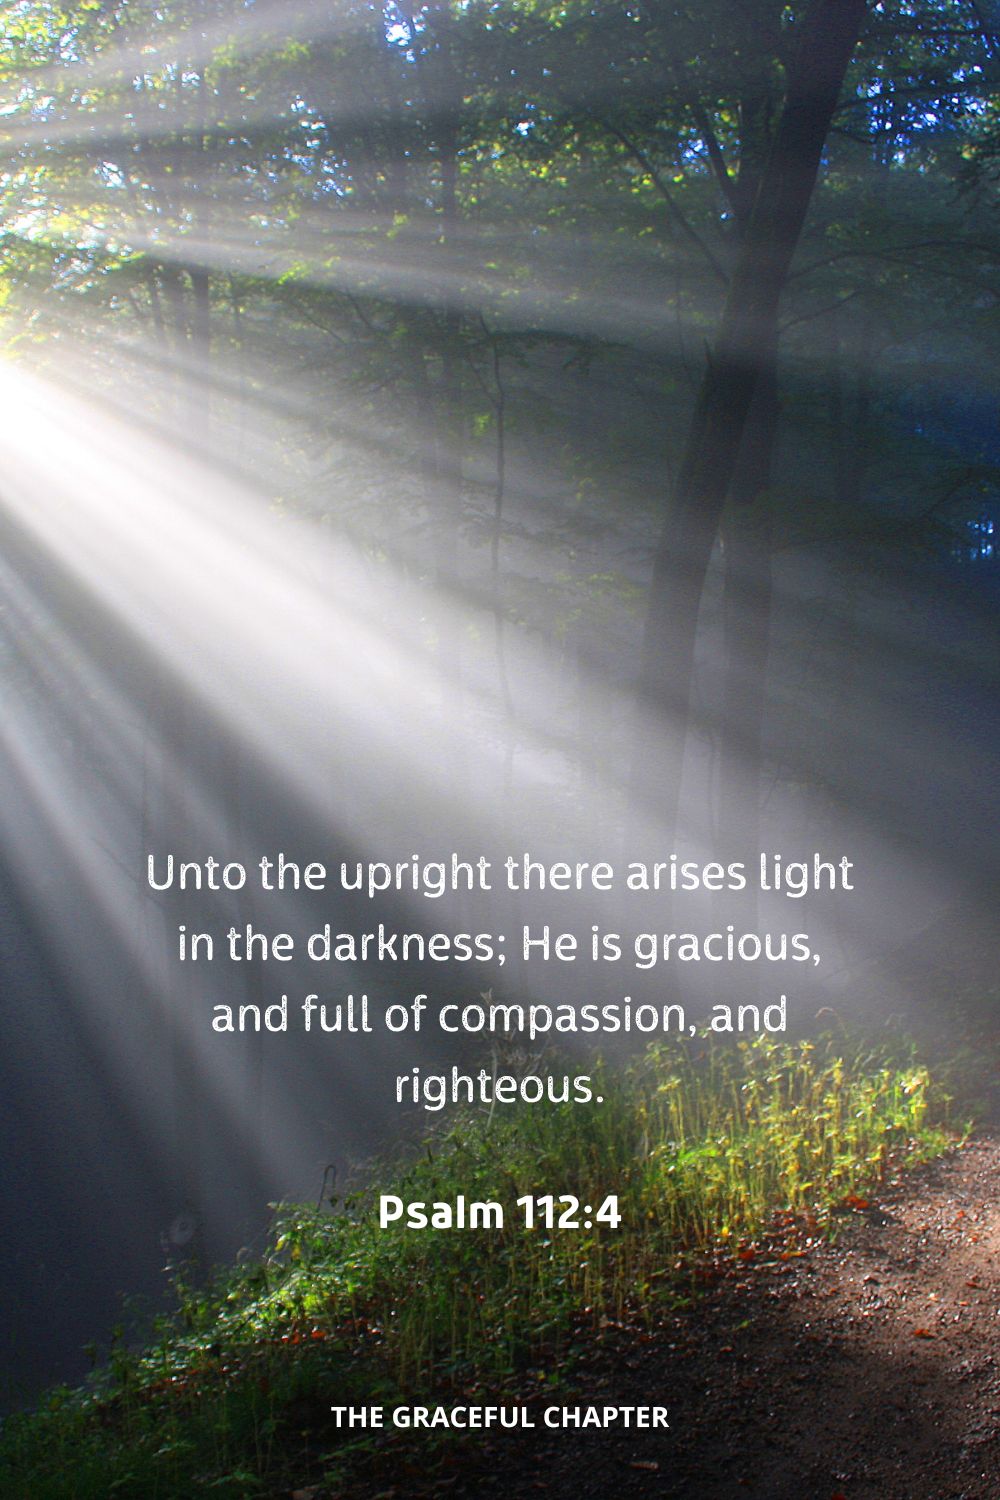 Unto the upright there arises light in the darkness; He is gracious, and full of compassion, and righteous.